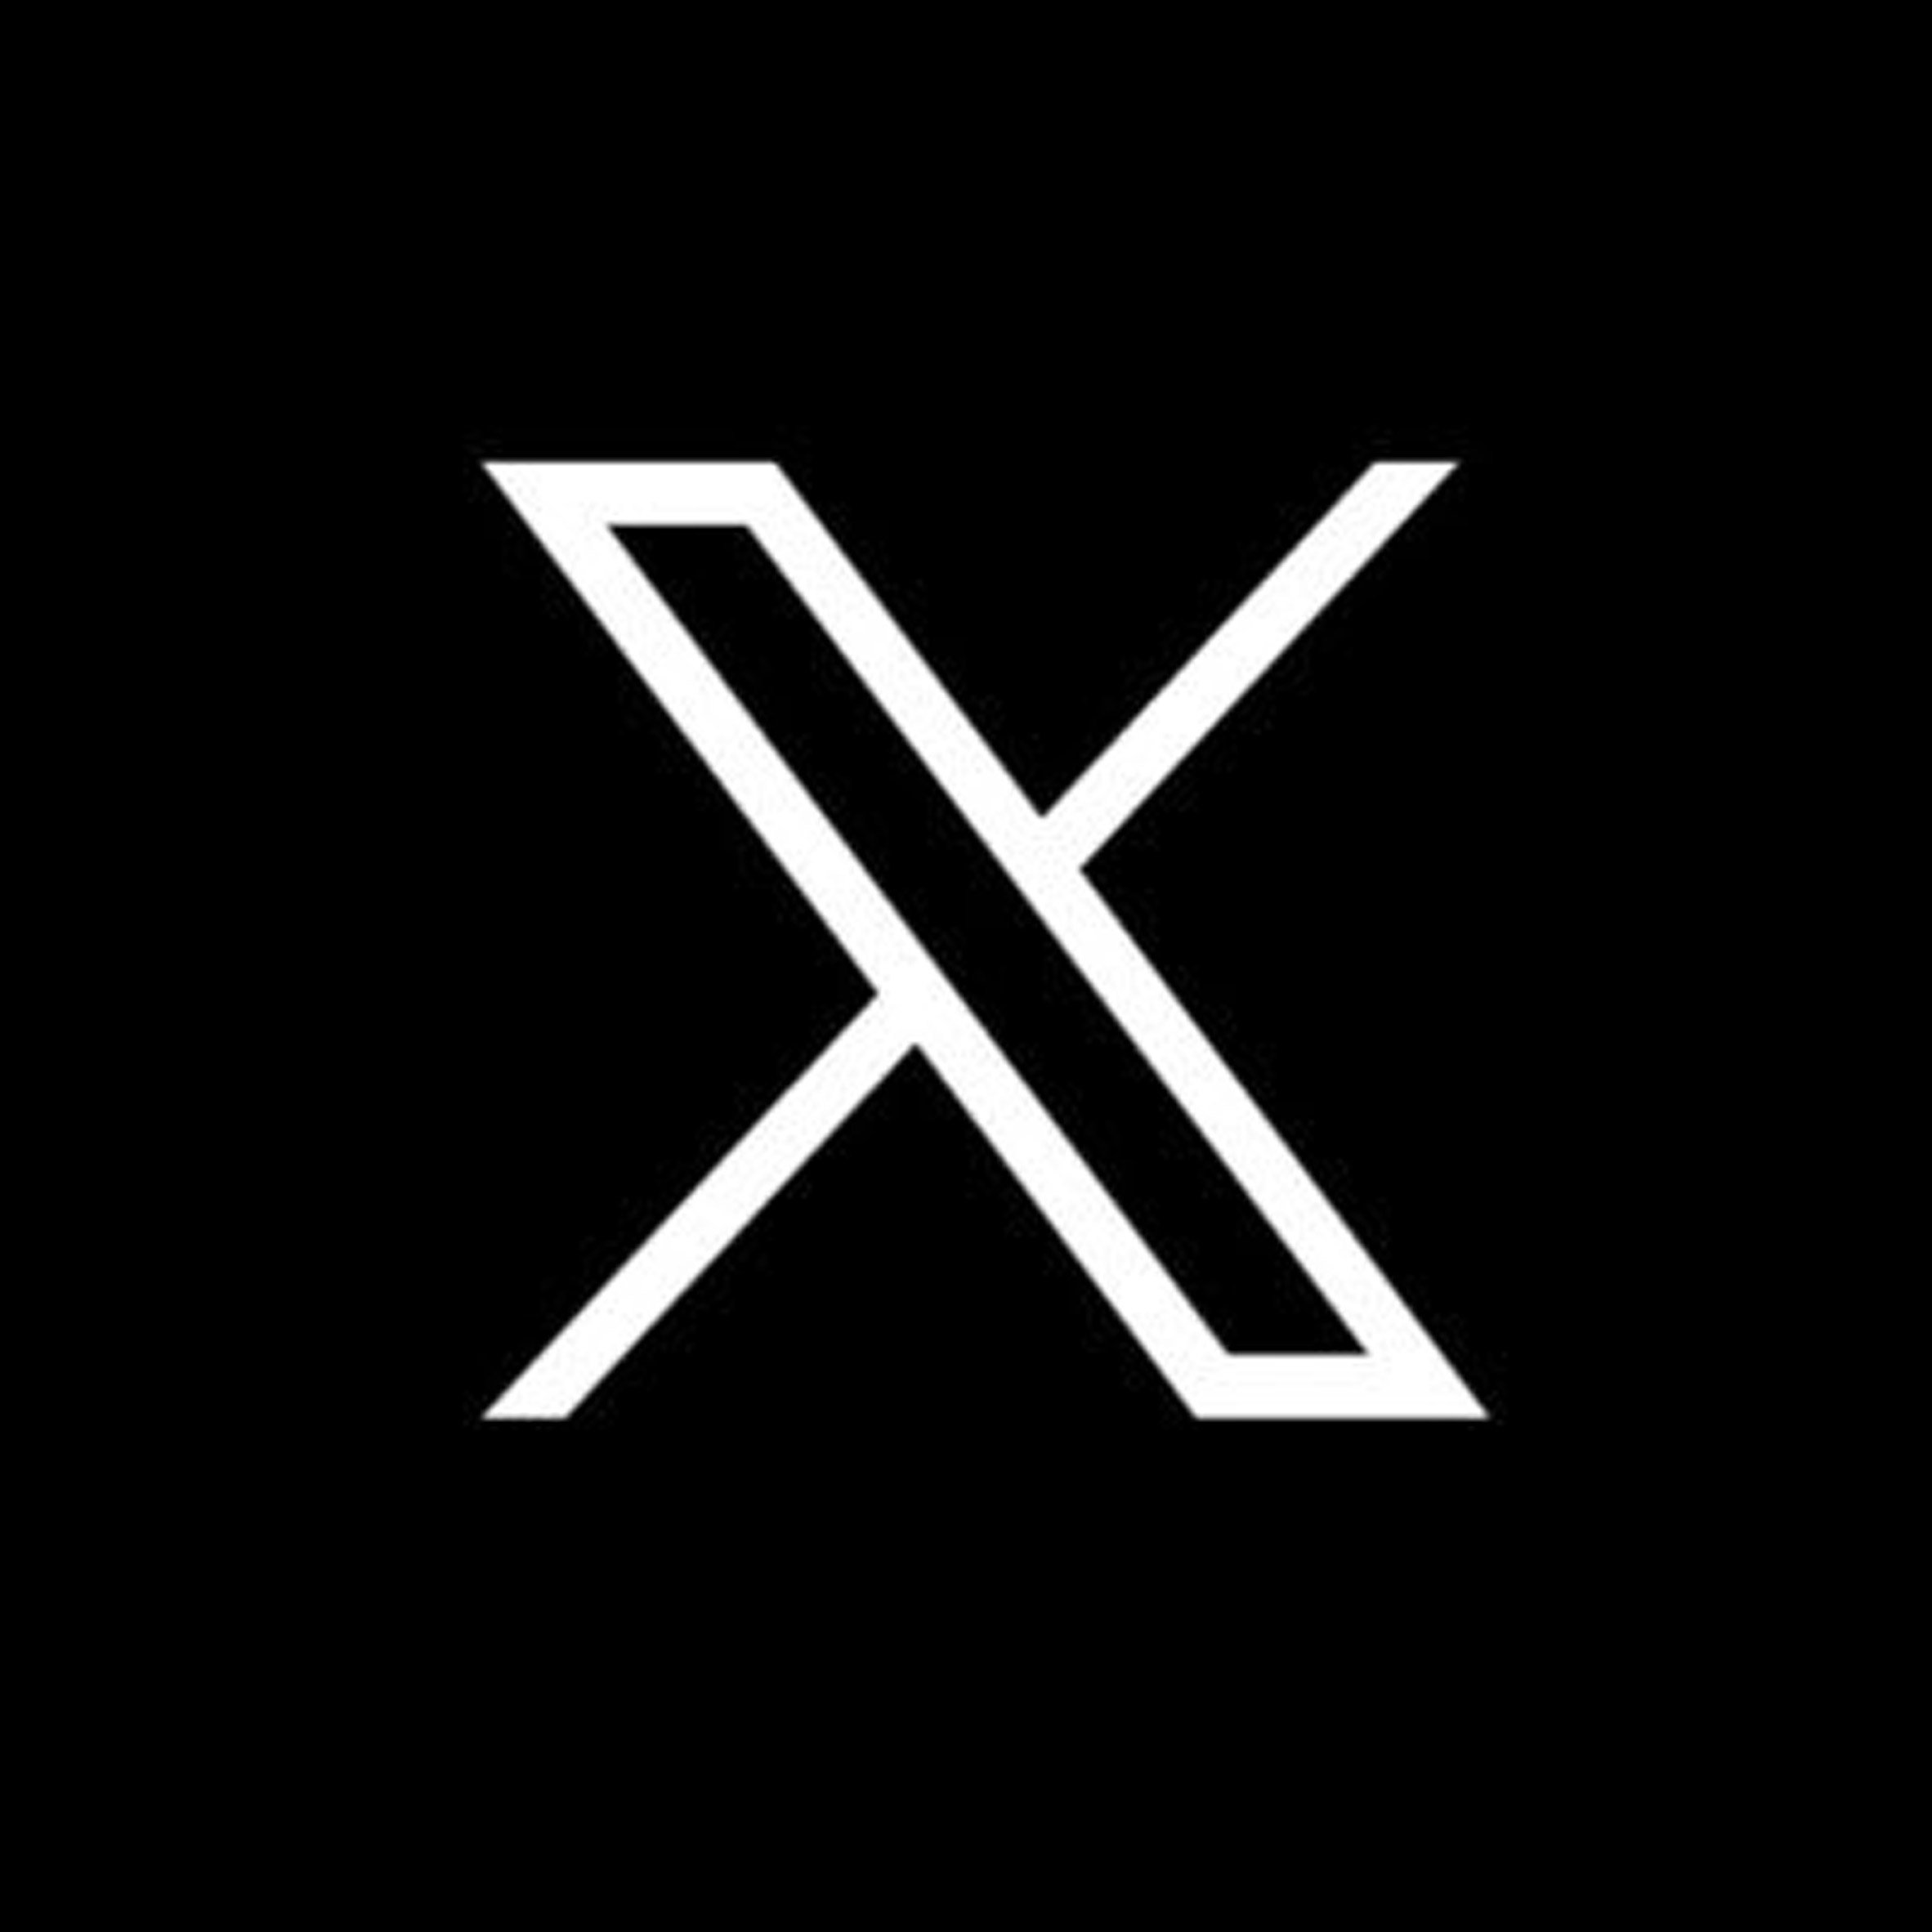 Twitter rebrands as X with 